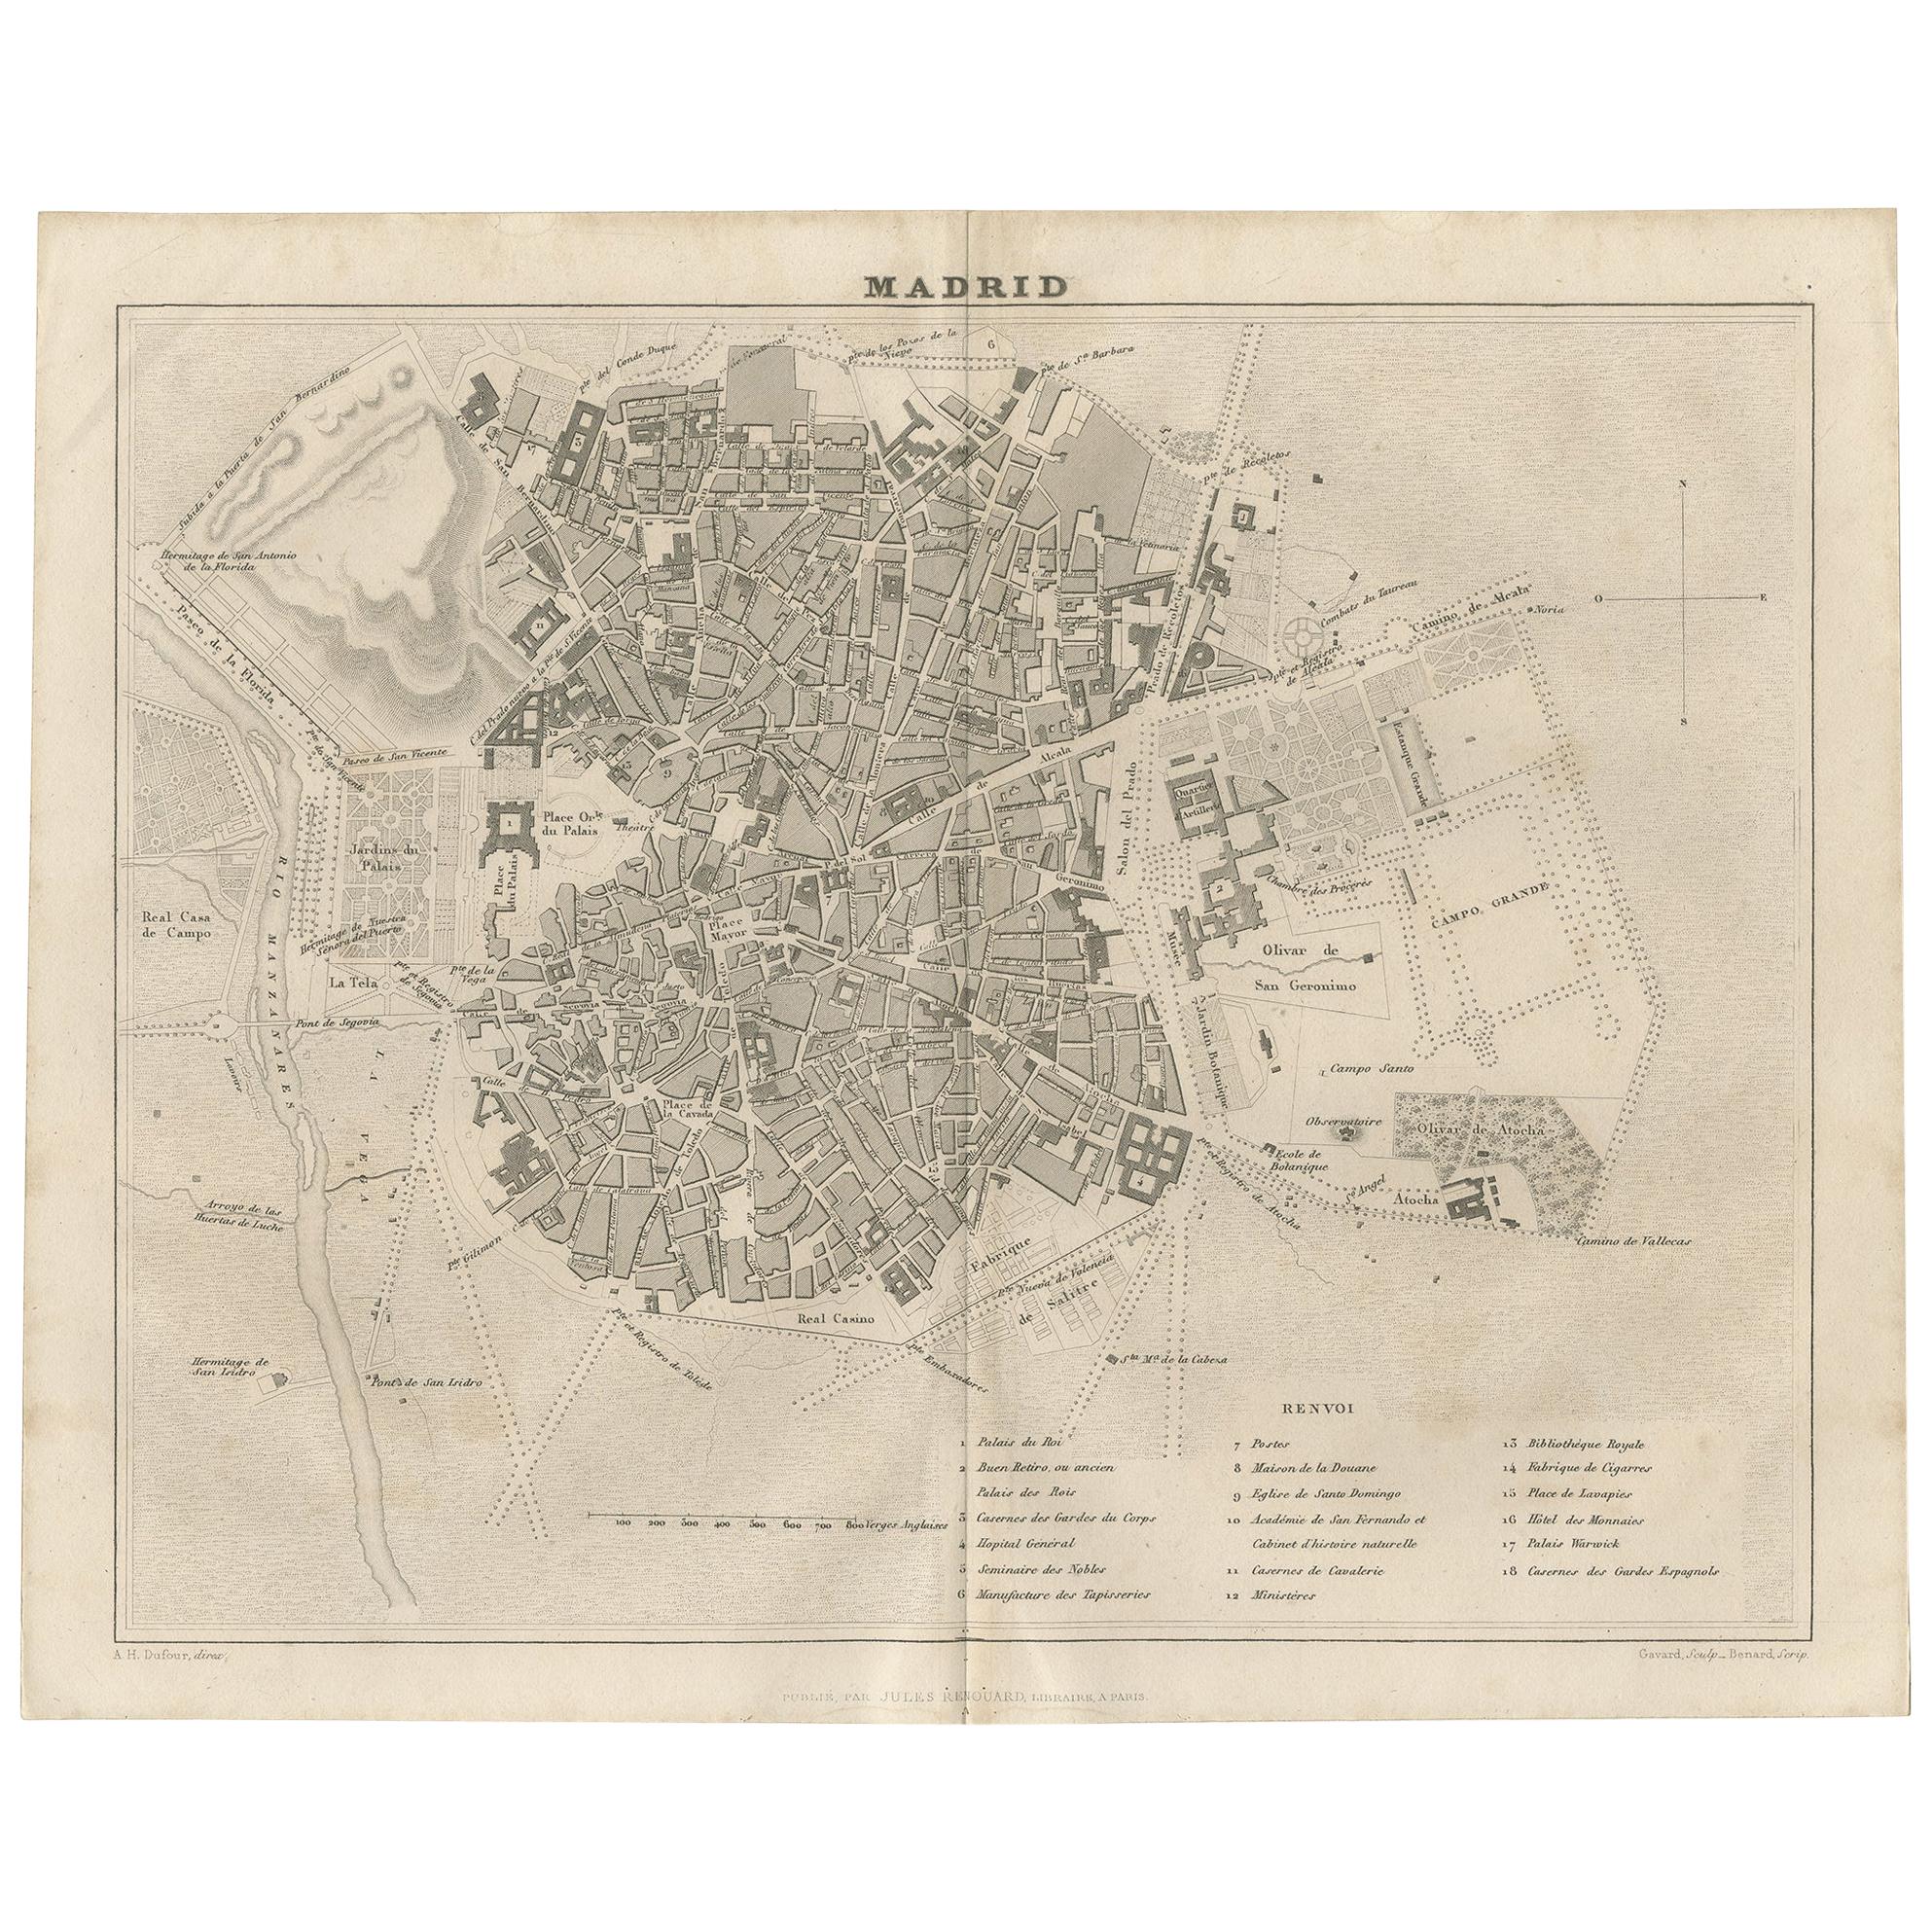 Antique Map of the City of Madrid by Balbi '1847'